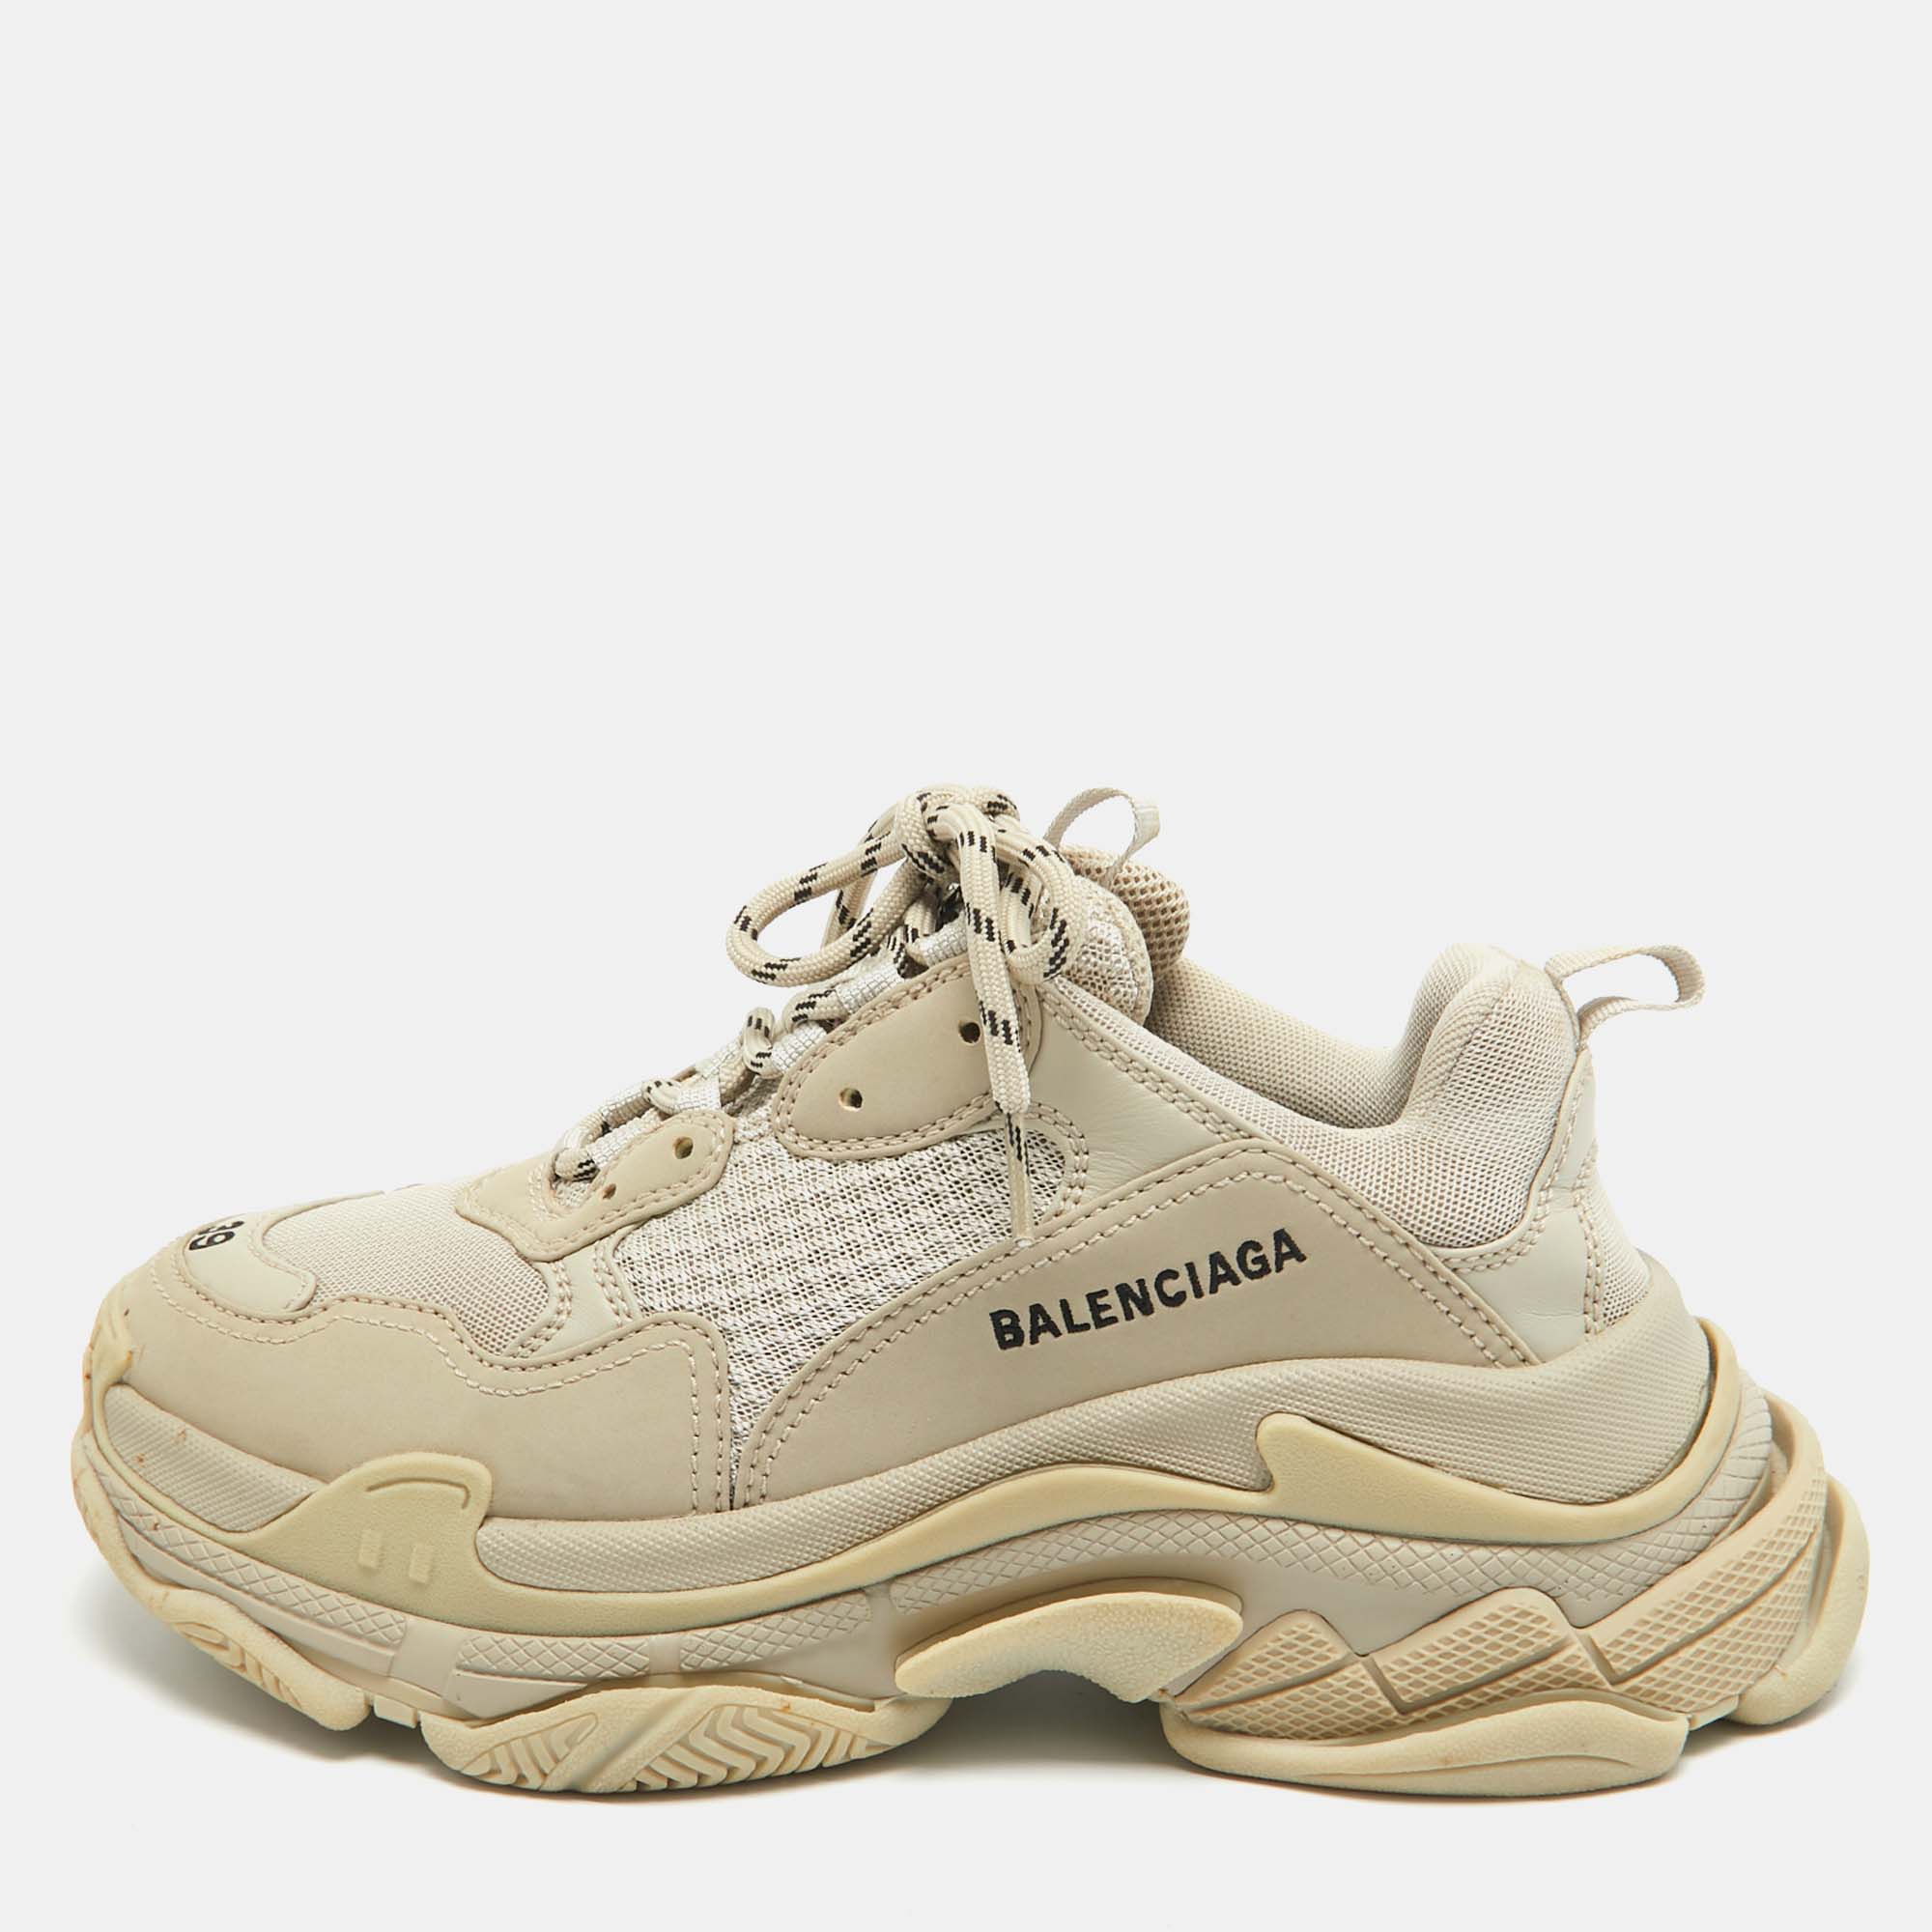 Balenciaga grey faux leather and mesh triple s sneakers size 39